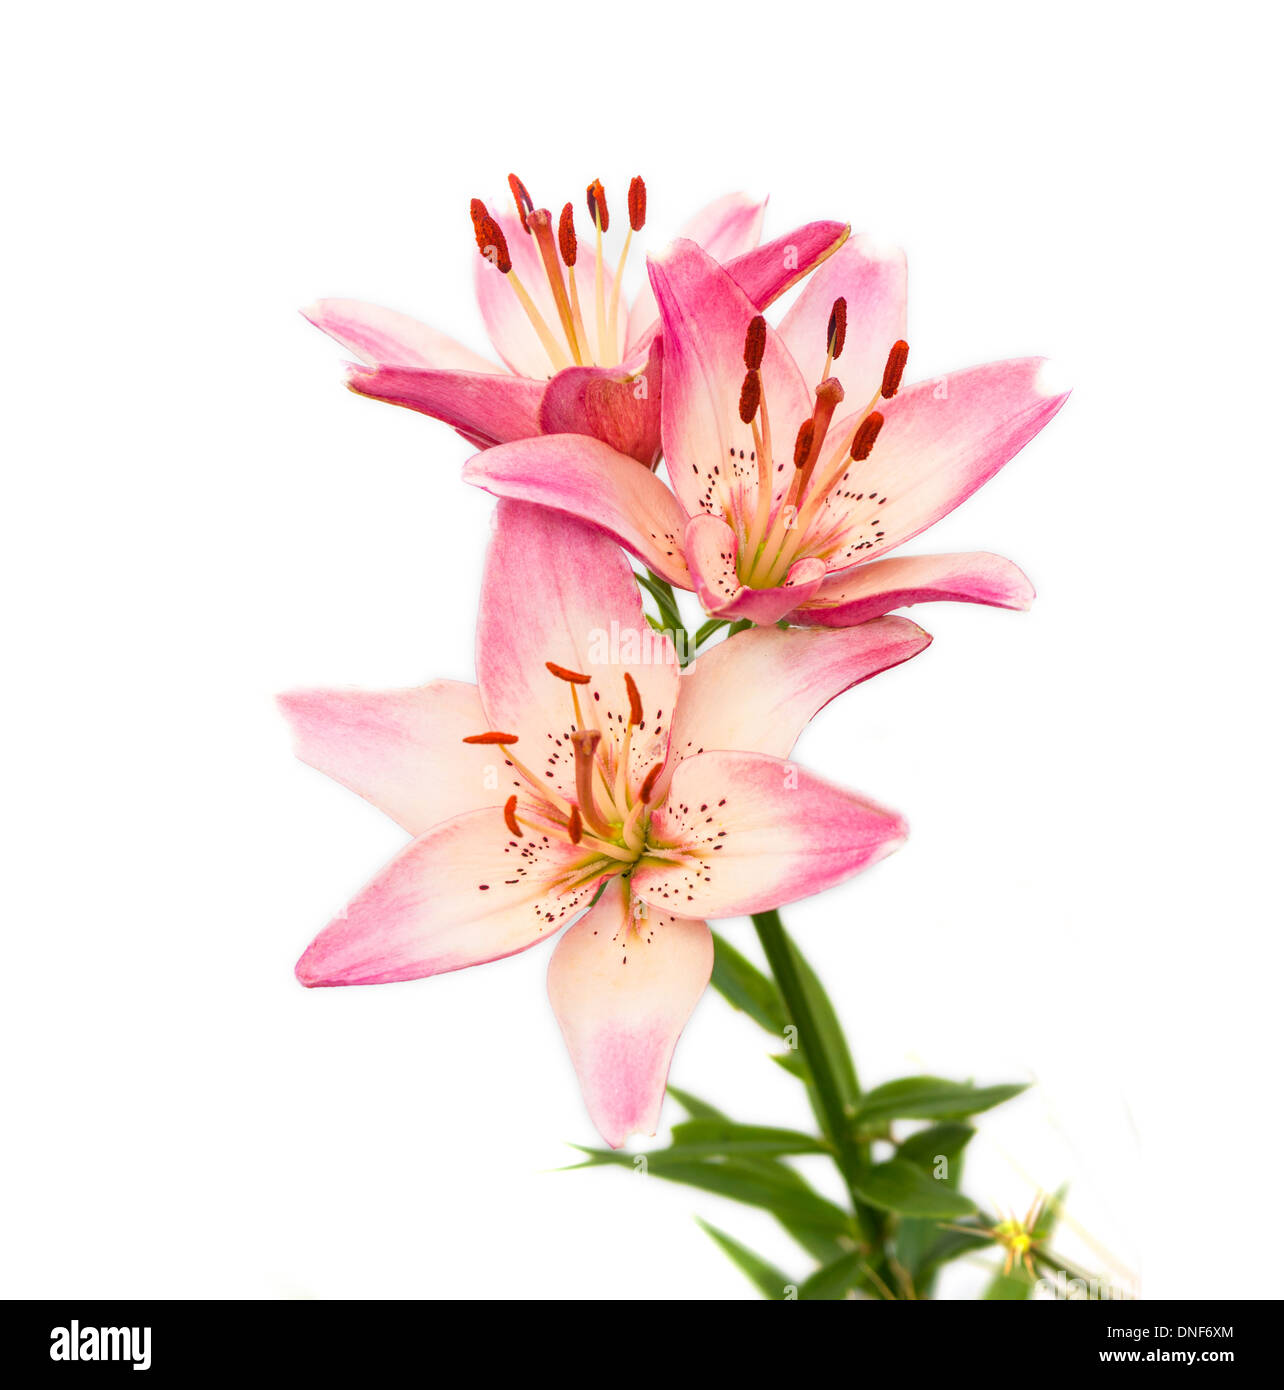 Purple lily Cut Out Stock Images & Pictures - Alamy